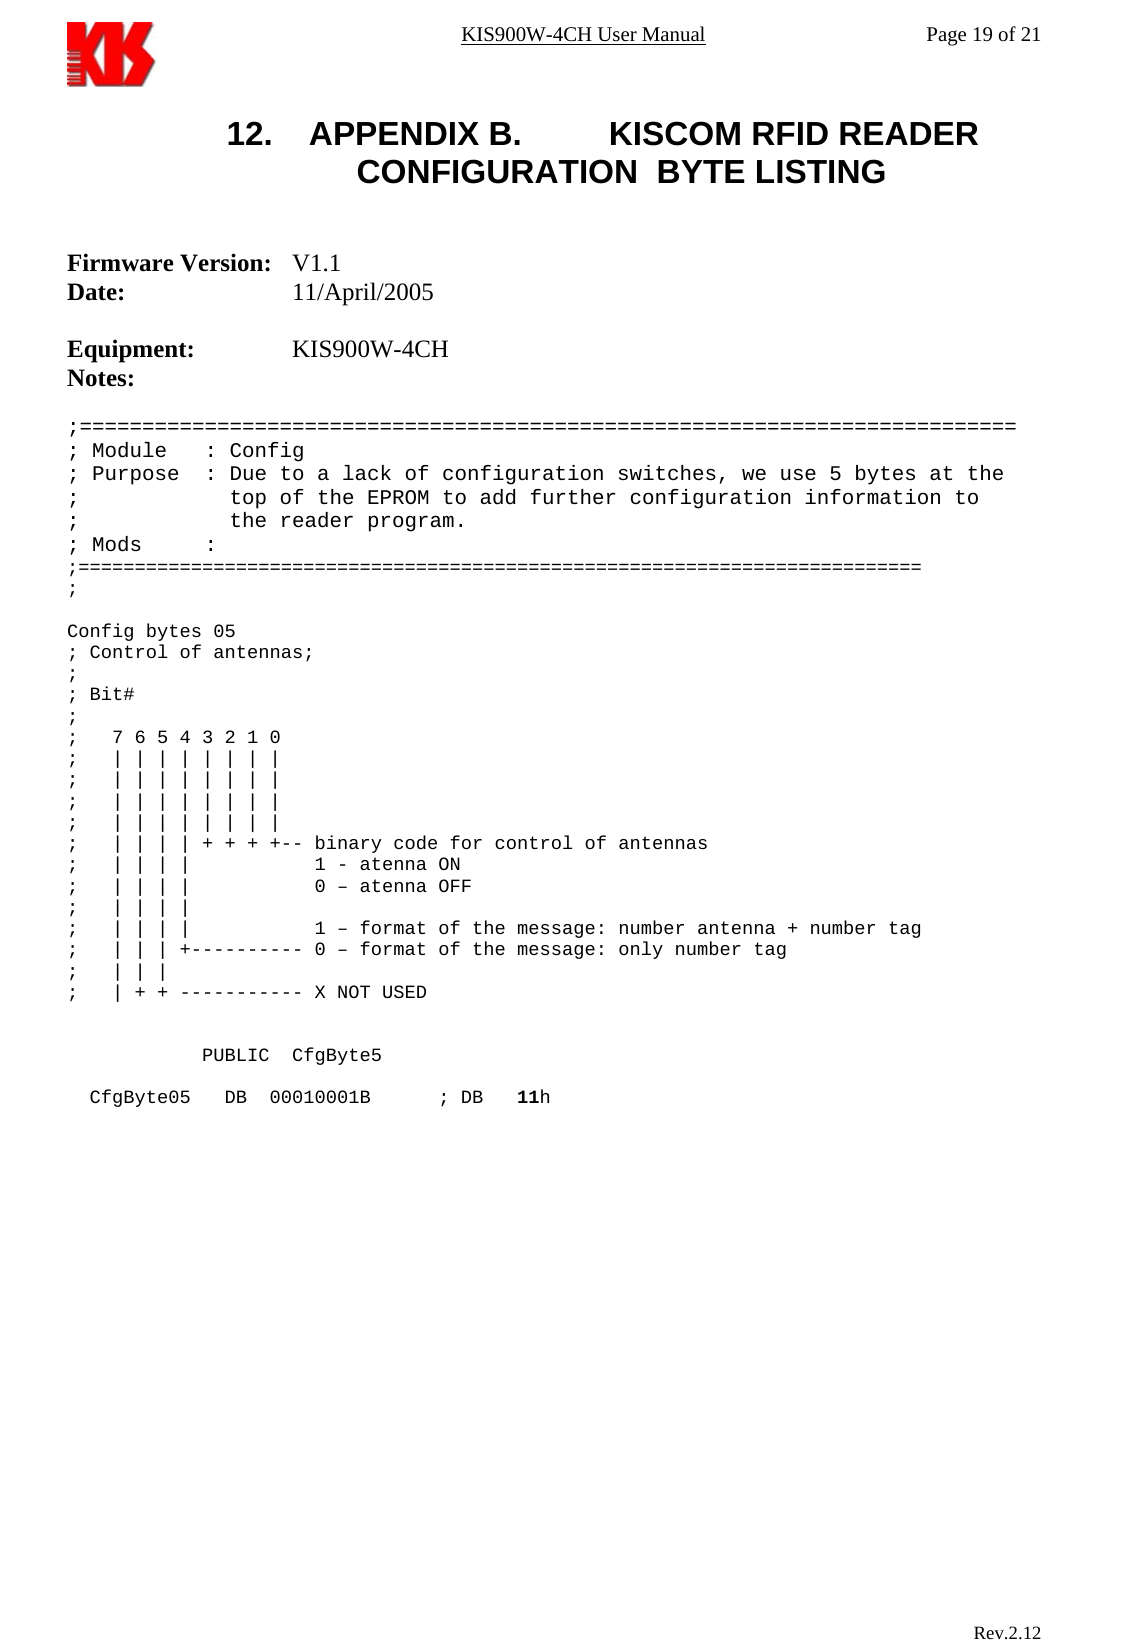 KIS900W-4CH User Manual           Page 19 of 21 12.  APPENDIX B.    KISCOM RFID READER CONFIGURATION  BYTE LISTING   Firmware Version: V1.1 Date:   11/April/2005  Equipment:   KIS900W-4CH Notes:     ;=========================================================================== ; Module   : Config ; Purpose  : Due to a lack of configuration switches, we use 5 bytes at the ;            top of the EPROM to add further configuration information to       ;            the reader program. ; Mods     :  ;=========================================================================== ;   Config bytes 05  ; Control of antennas;  ; ; Bit# ; ;   7 6 5 4 3 2 1 0 ;   | | | | | | | | ;   | | | | | | | |   ;   | | | | | | | |        ;   | | | | | | | | ;   | | | | + + + +-- binary code for control of antennas ;   | | | |           1 - atenna ON ;   | | | |           0 – atenna OFF ;   | | | |            ;   | | | |           1 – format of the message: number antenna + number tag ;   | | | +---------- 0 – format of the message: only number tag ;   | | |  ;   | + + ----------- X NOT USED               PUBLIC  CfgByte5    CfgByte05   DB  00010001B      ; DB   11h                                Rev.2.12  